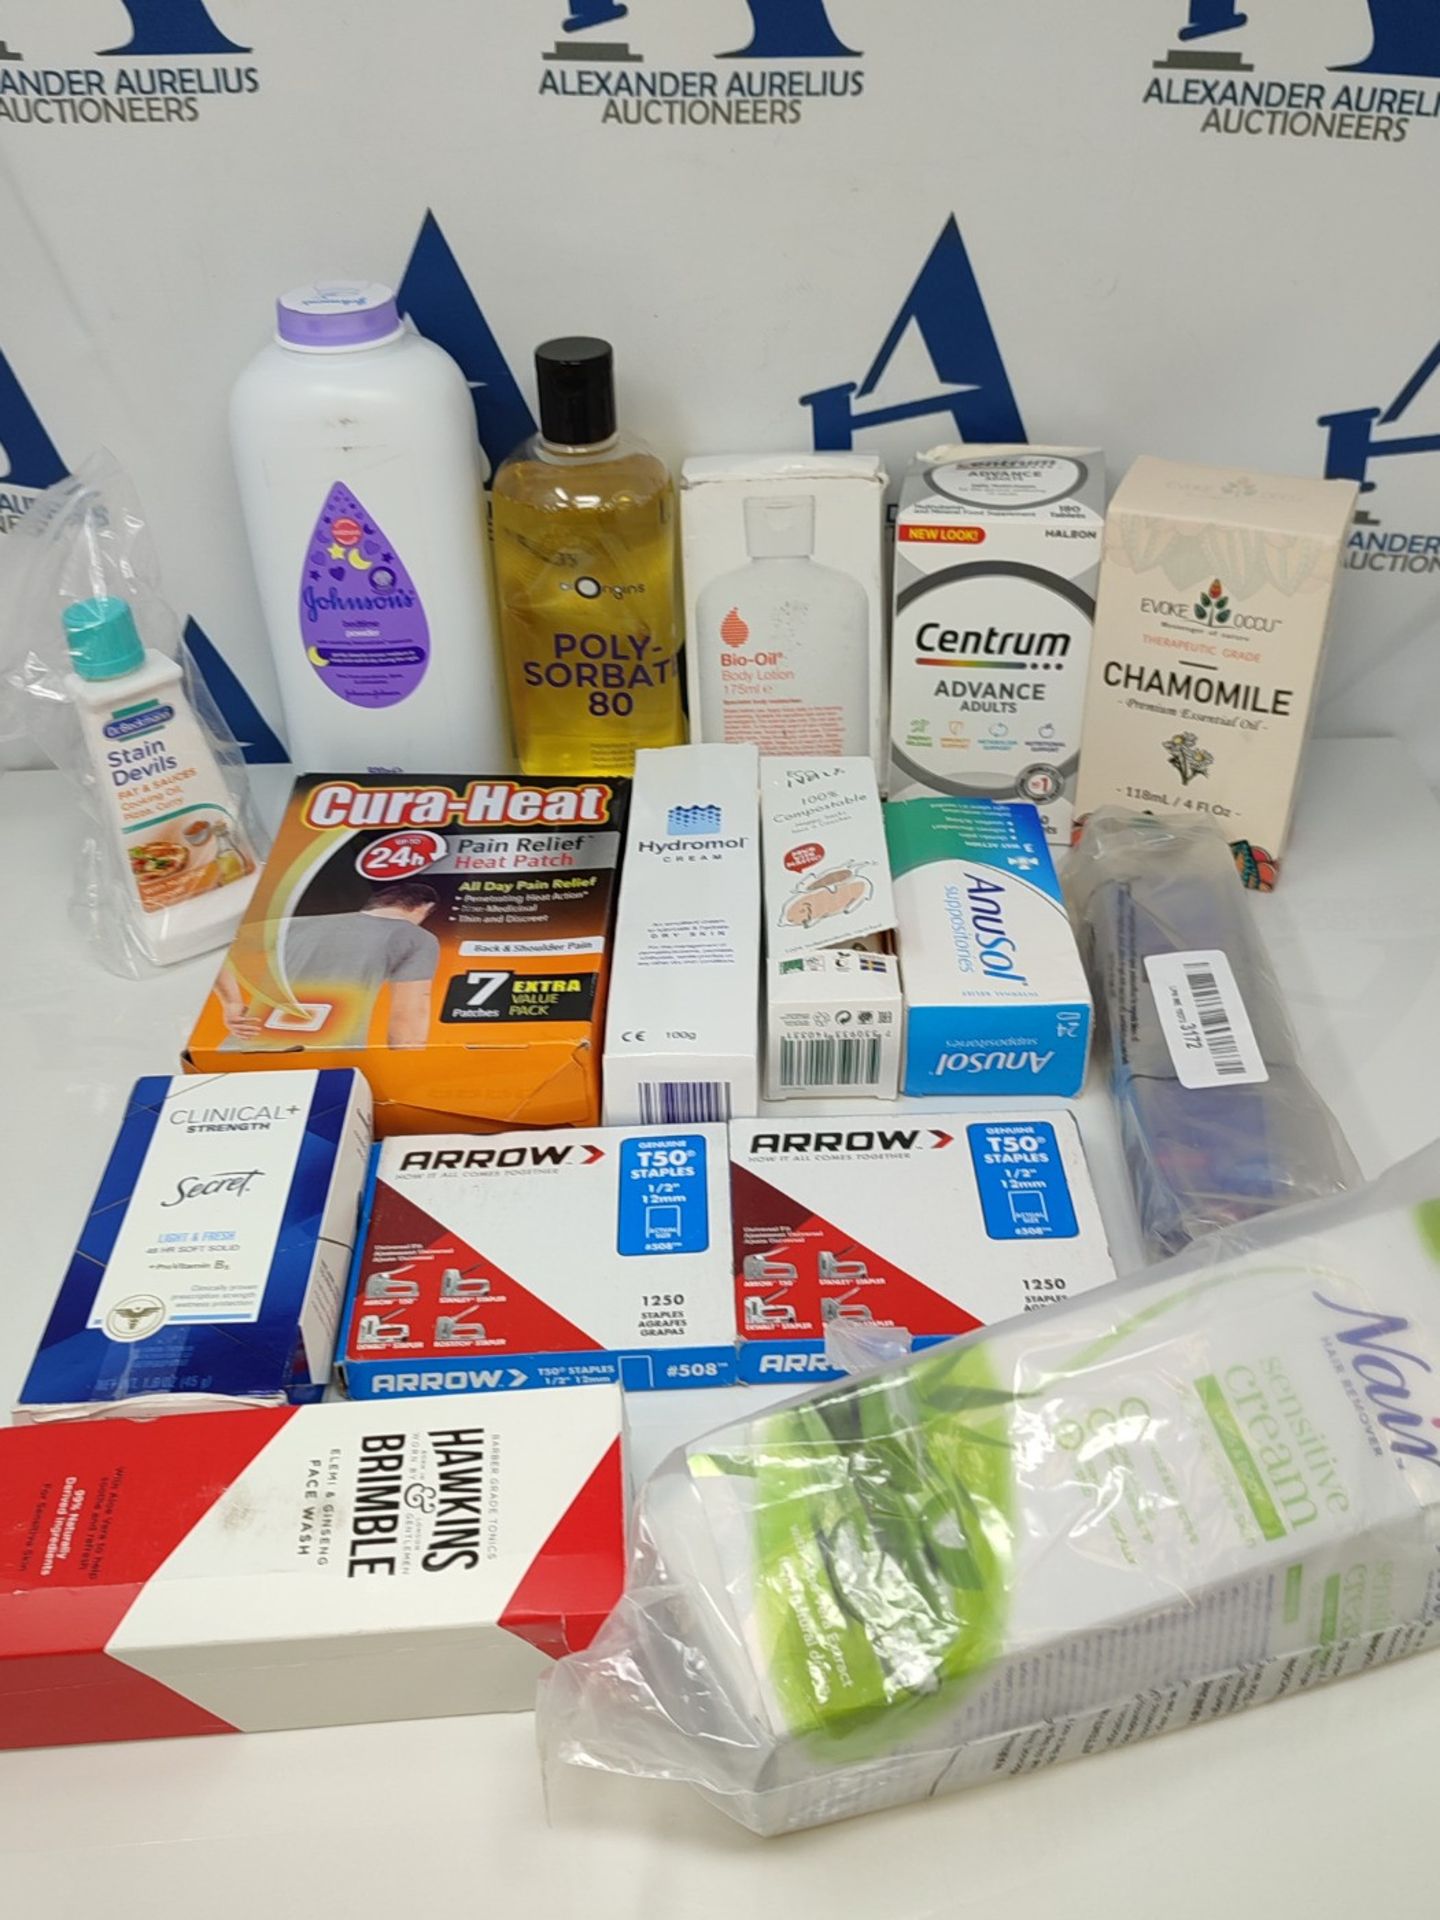 16 items of Pharmaceutical products and personal care: Hydromol, Centrum, Nair and mor